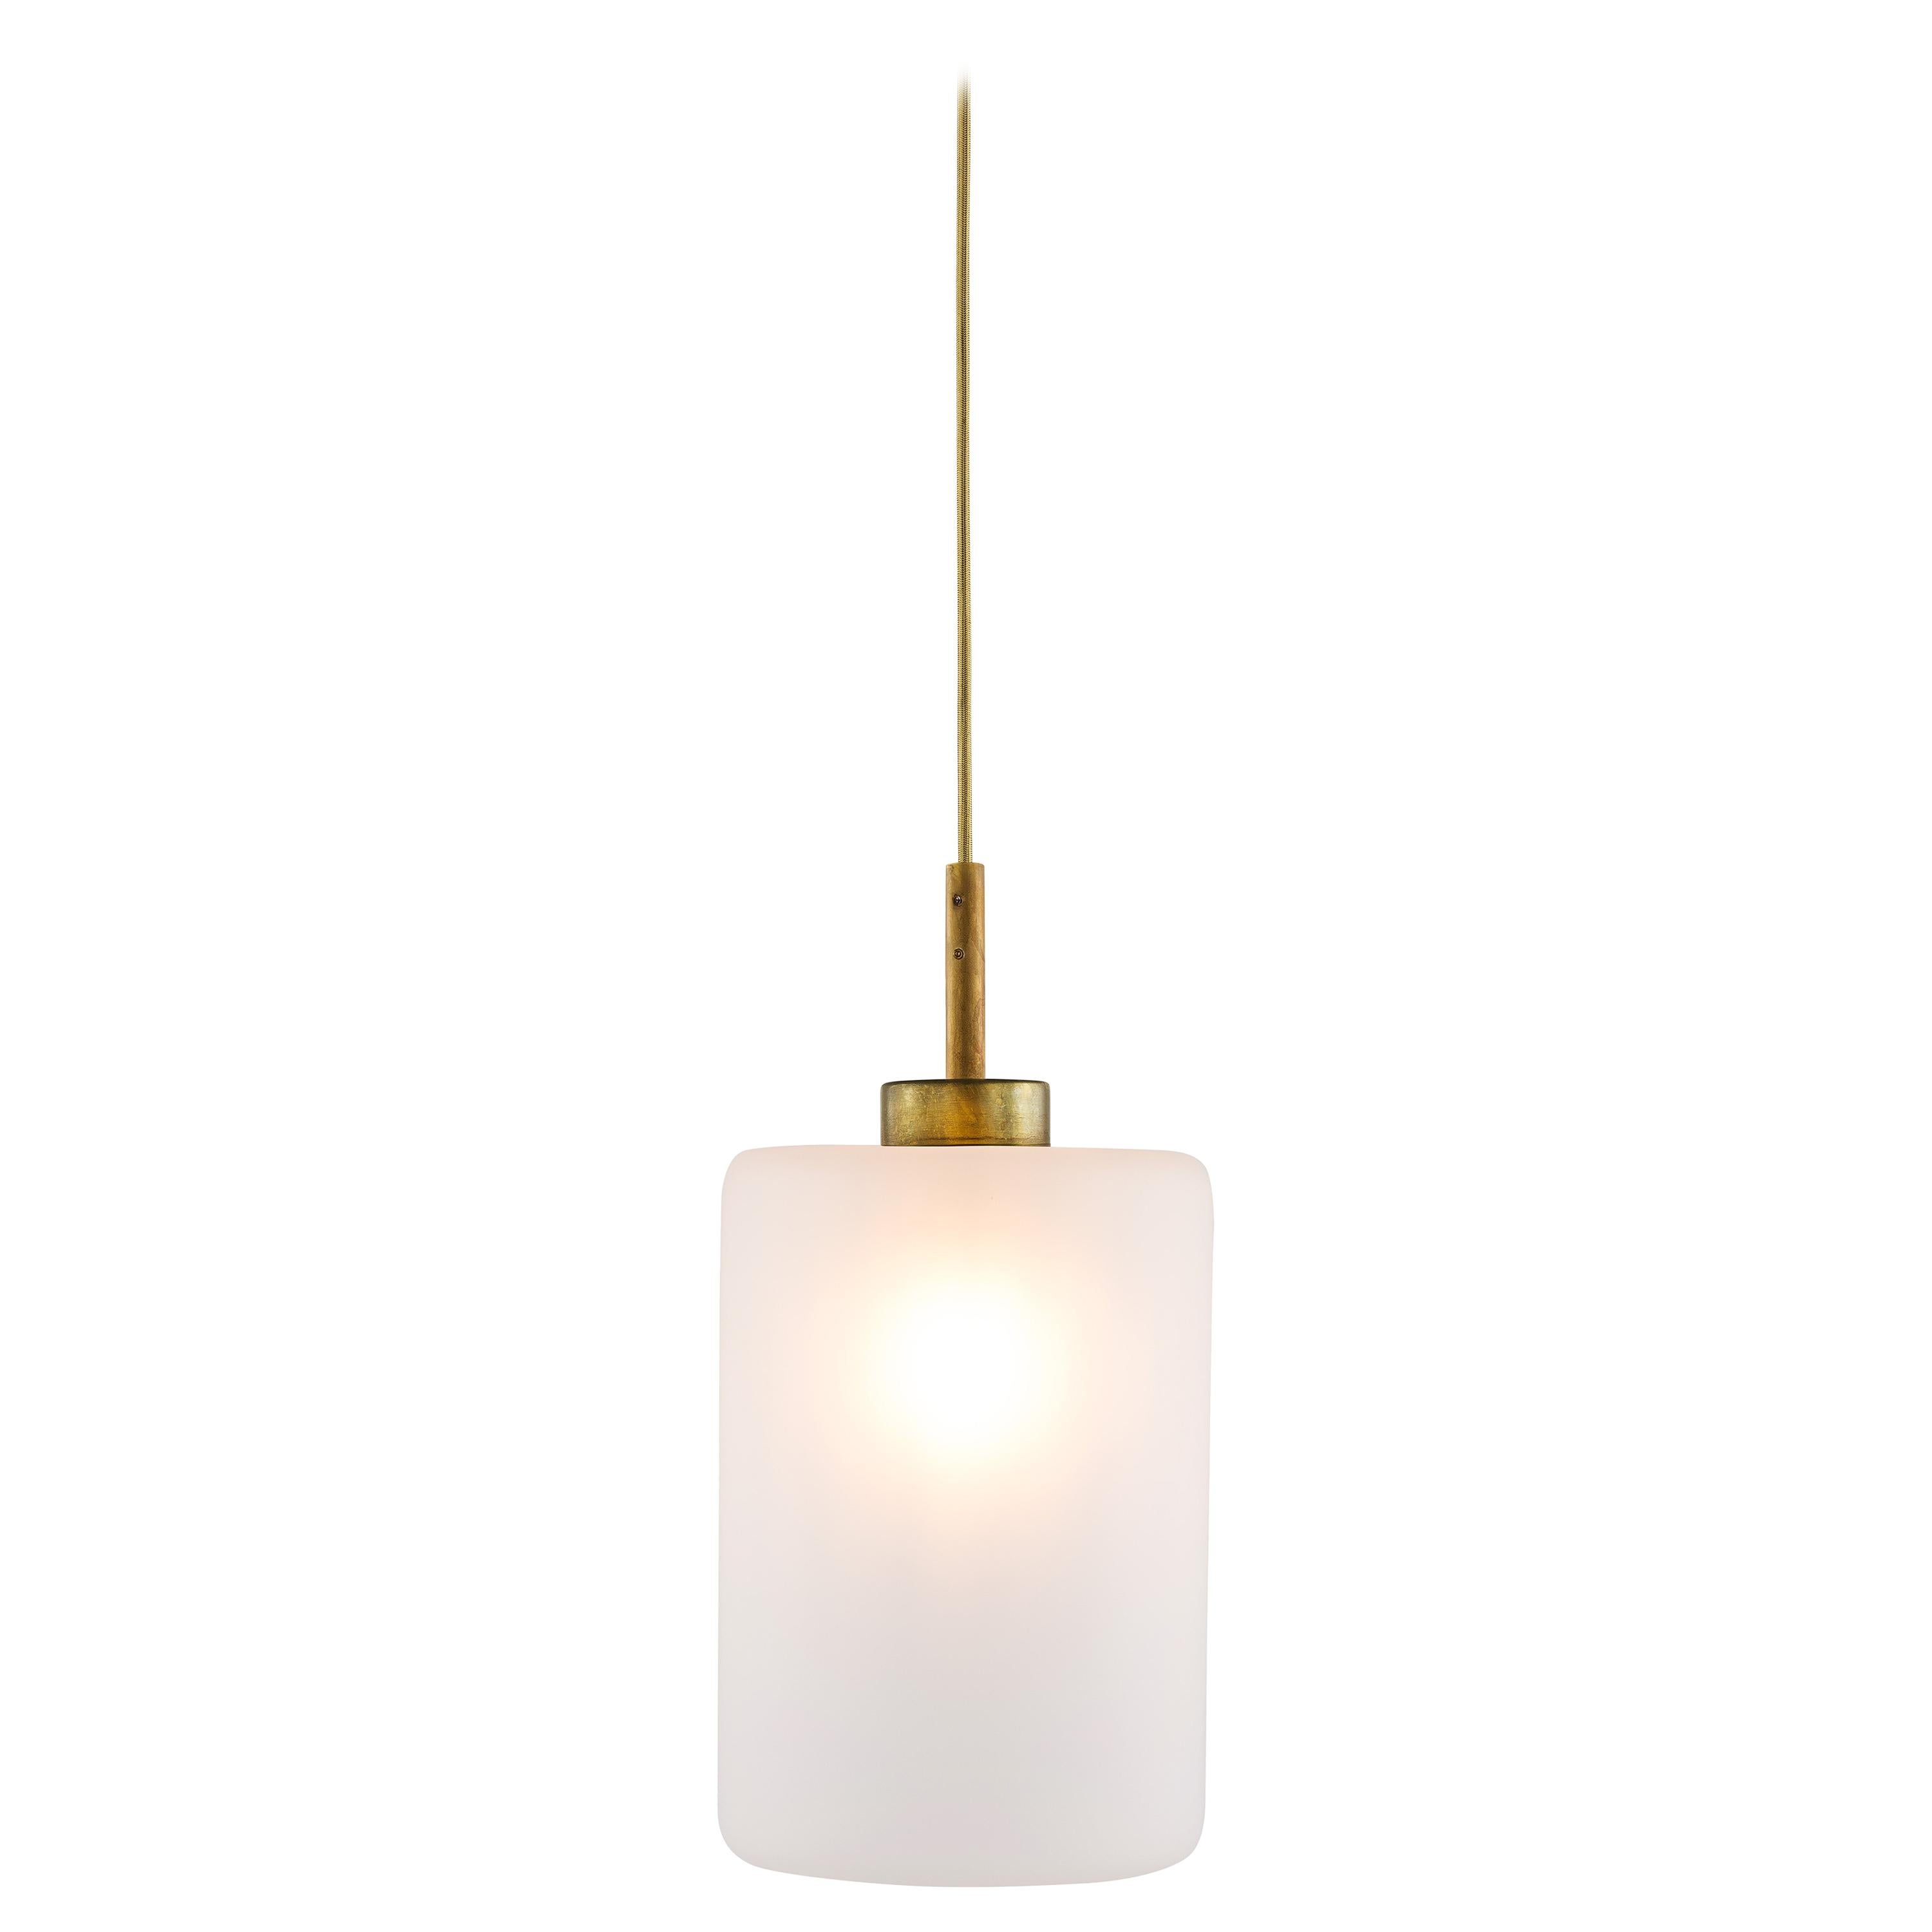 Modern Pendant with Colored Glass in a Brass Burnished Finish, Louise